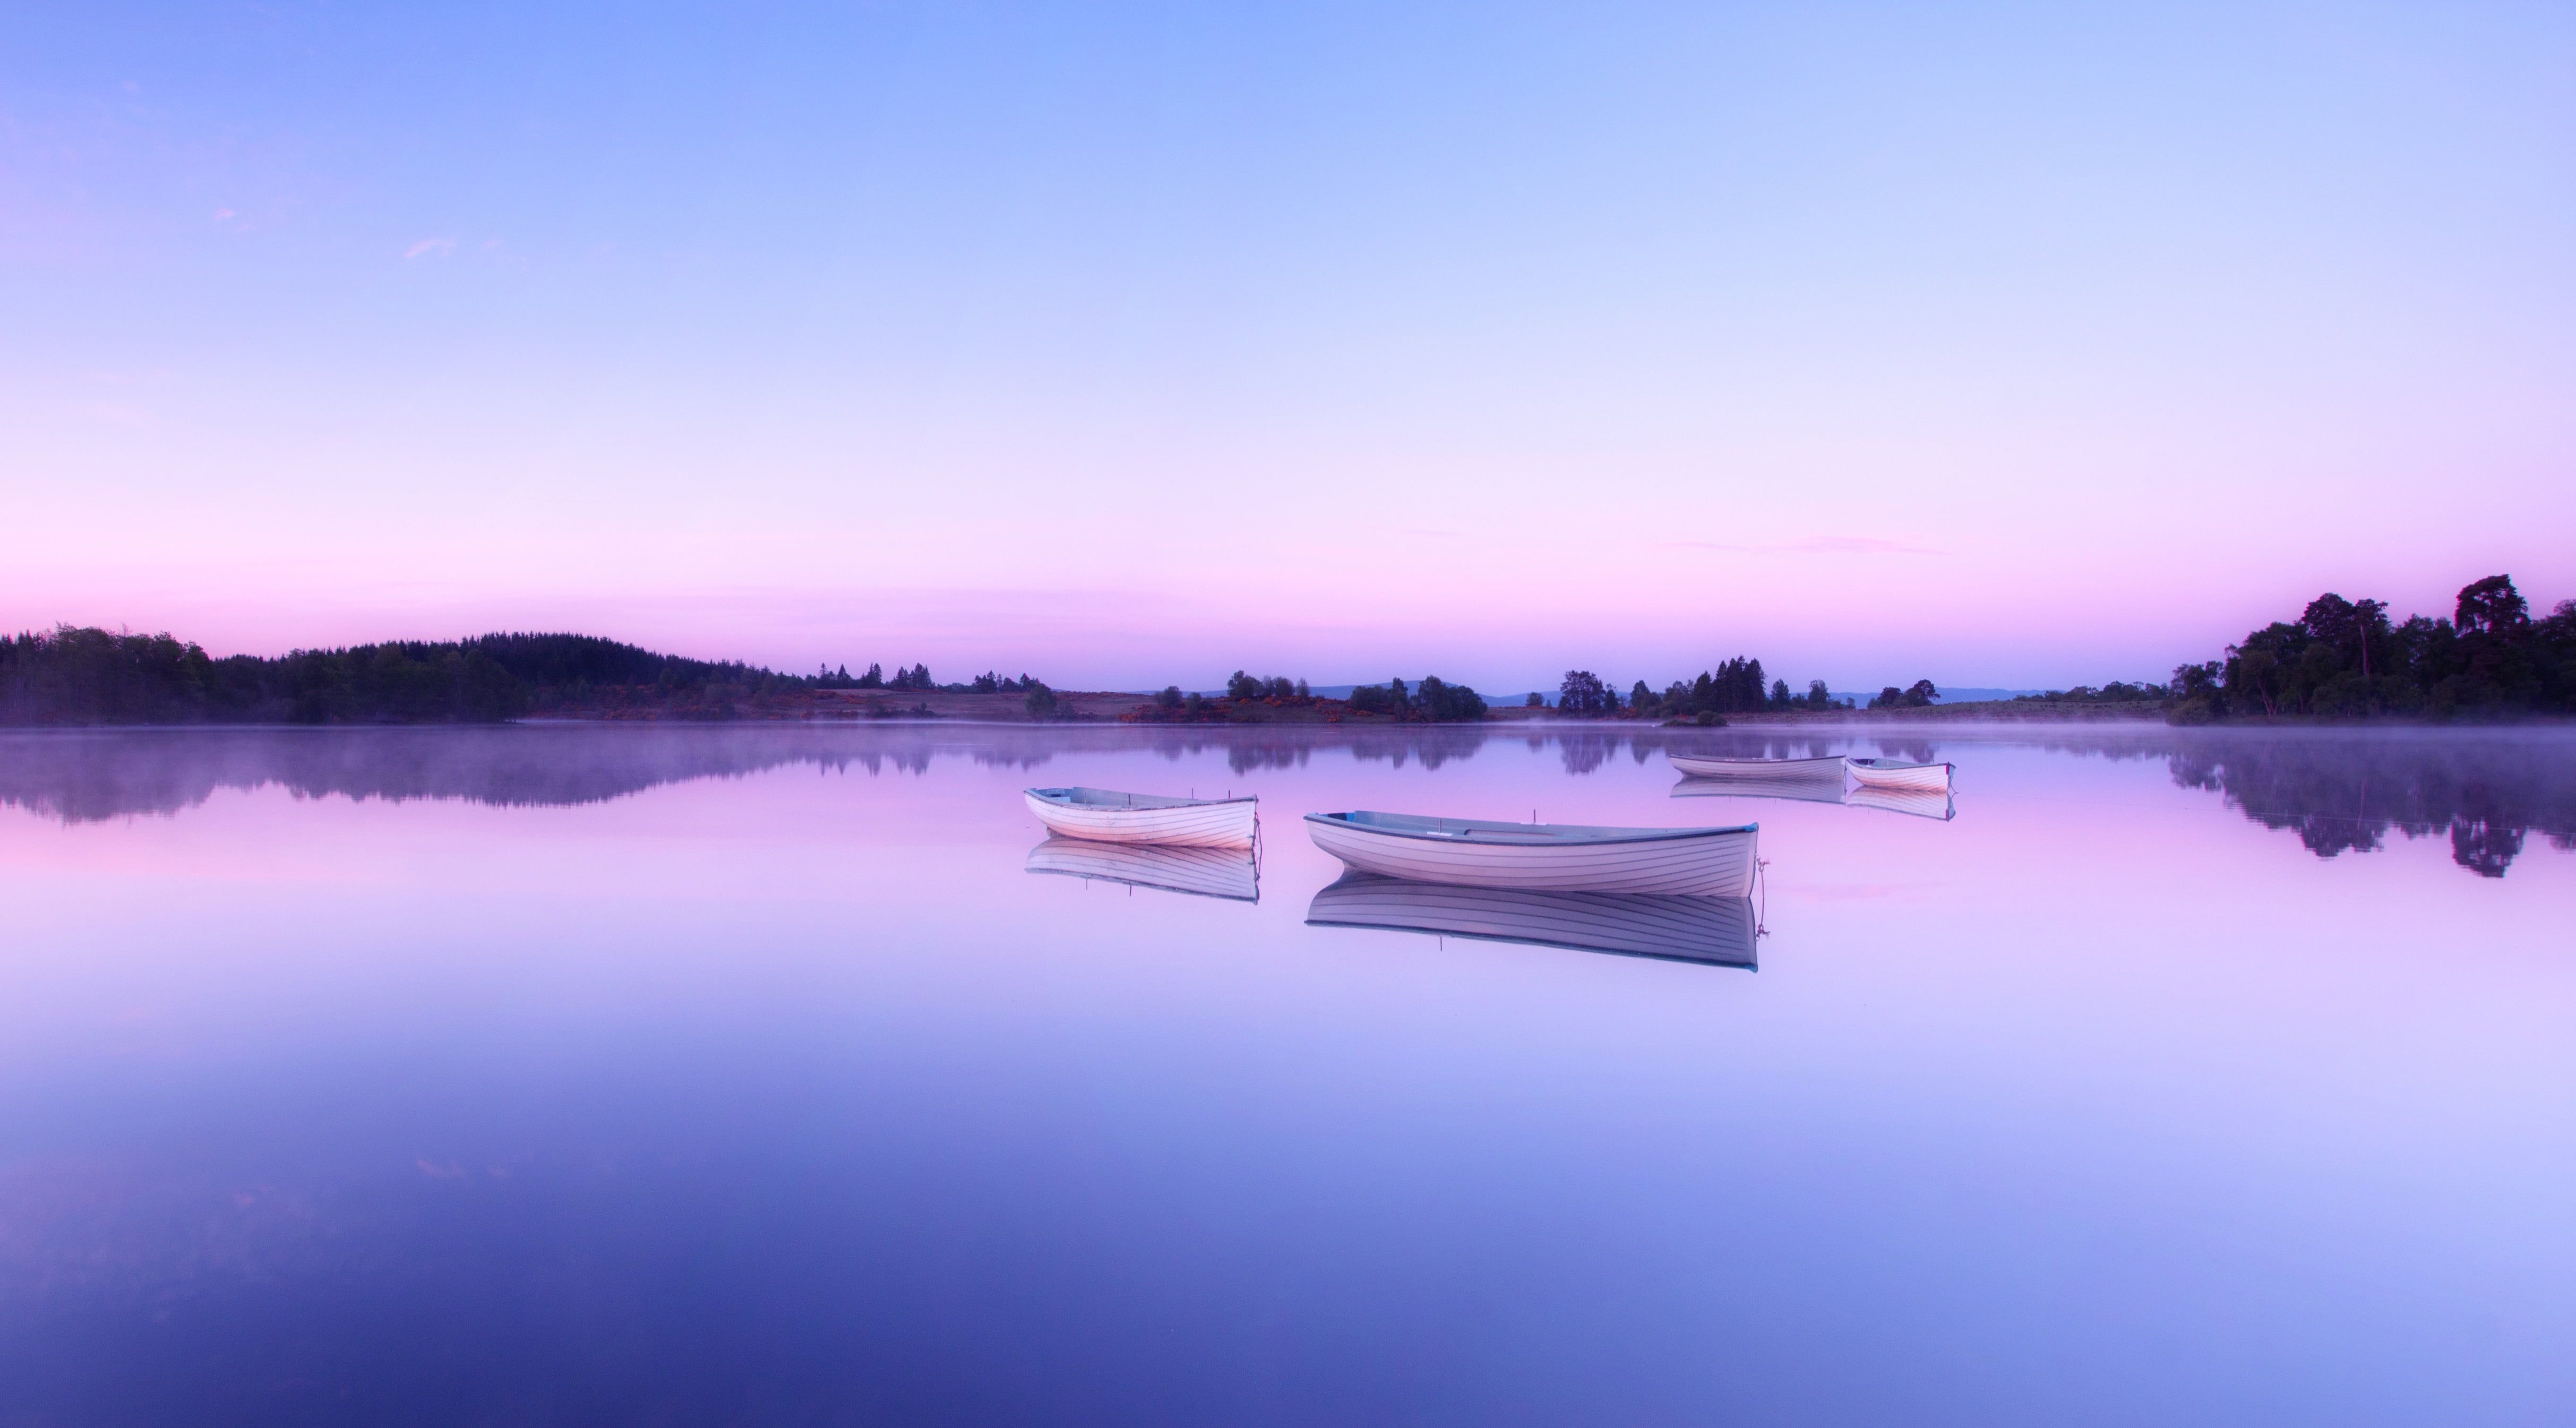 A purple and blue sunset over a lake with three small boats. - Lake